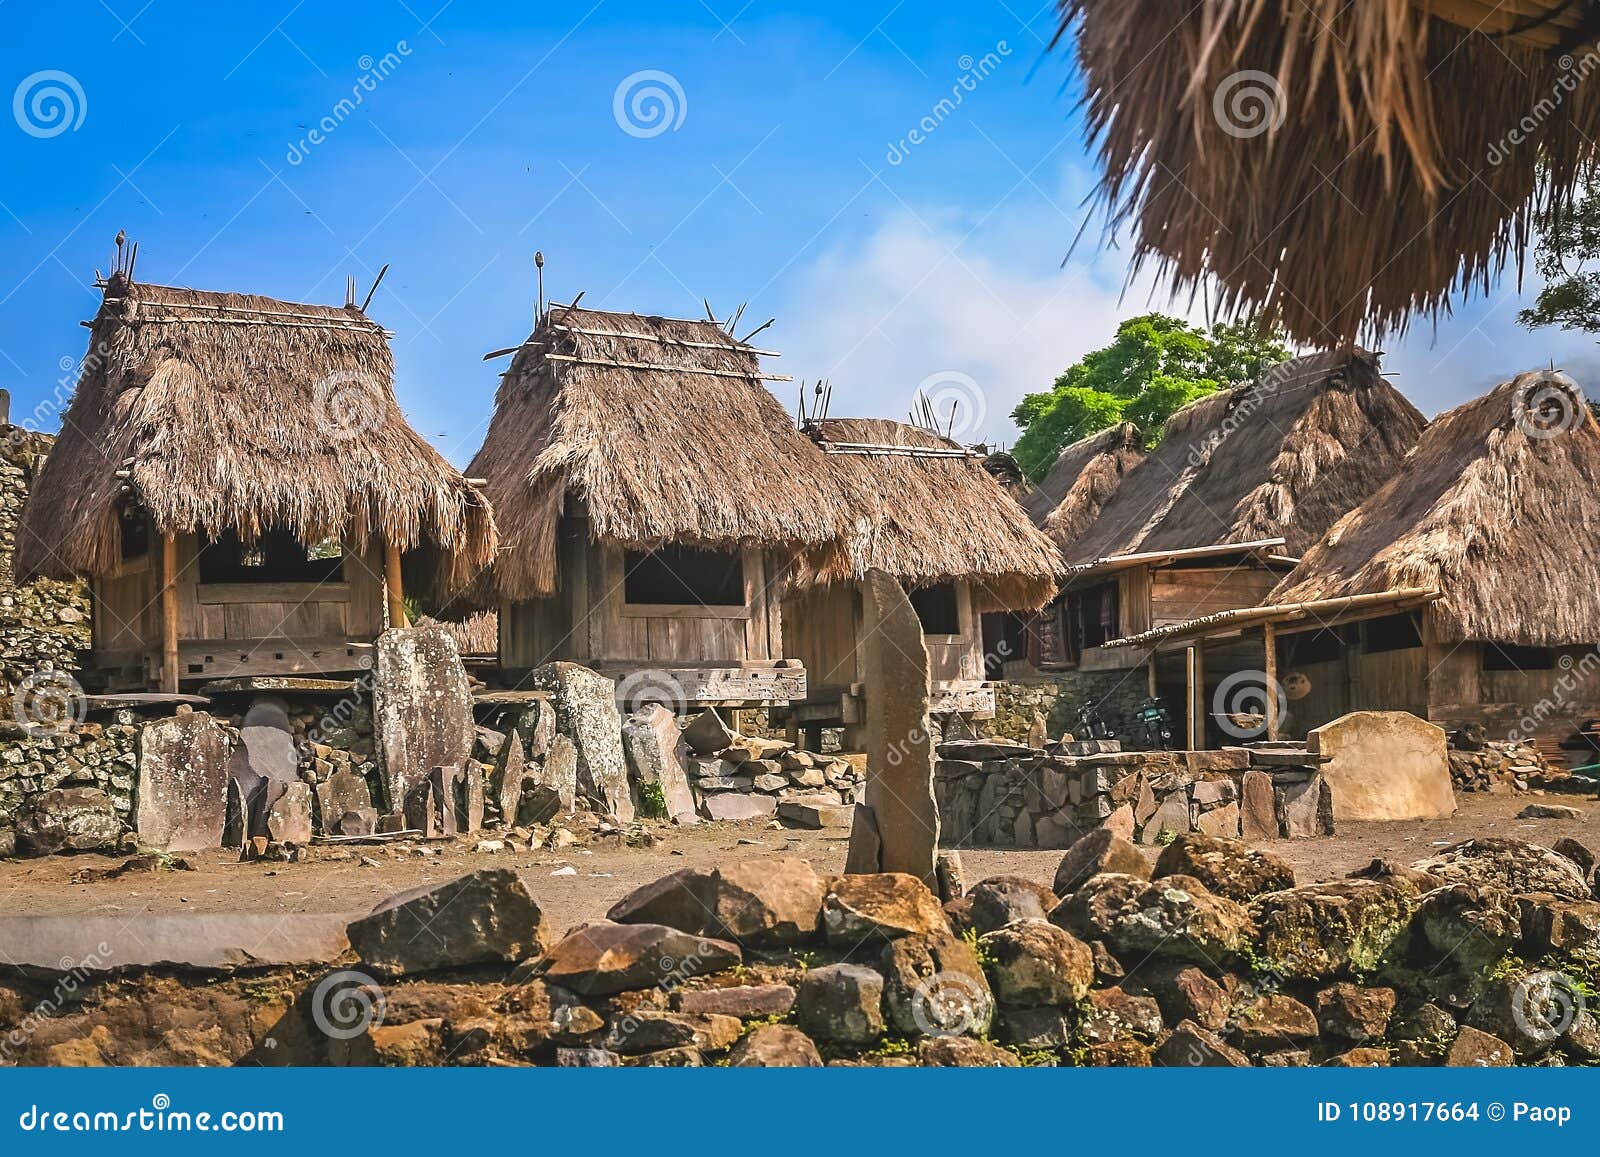 old wooden huts in bena village